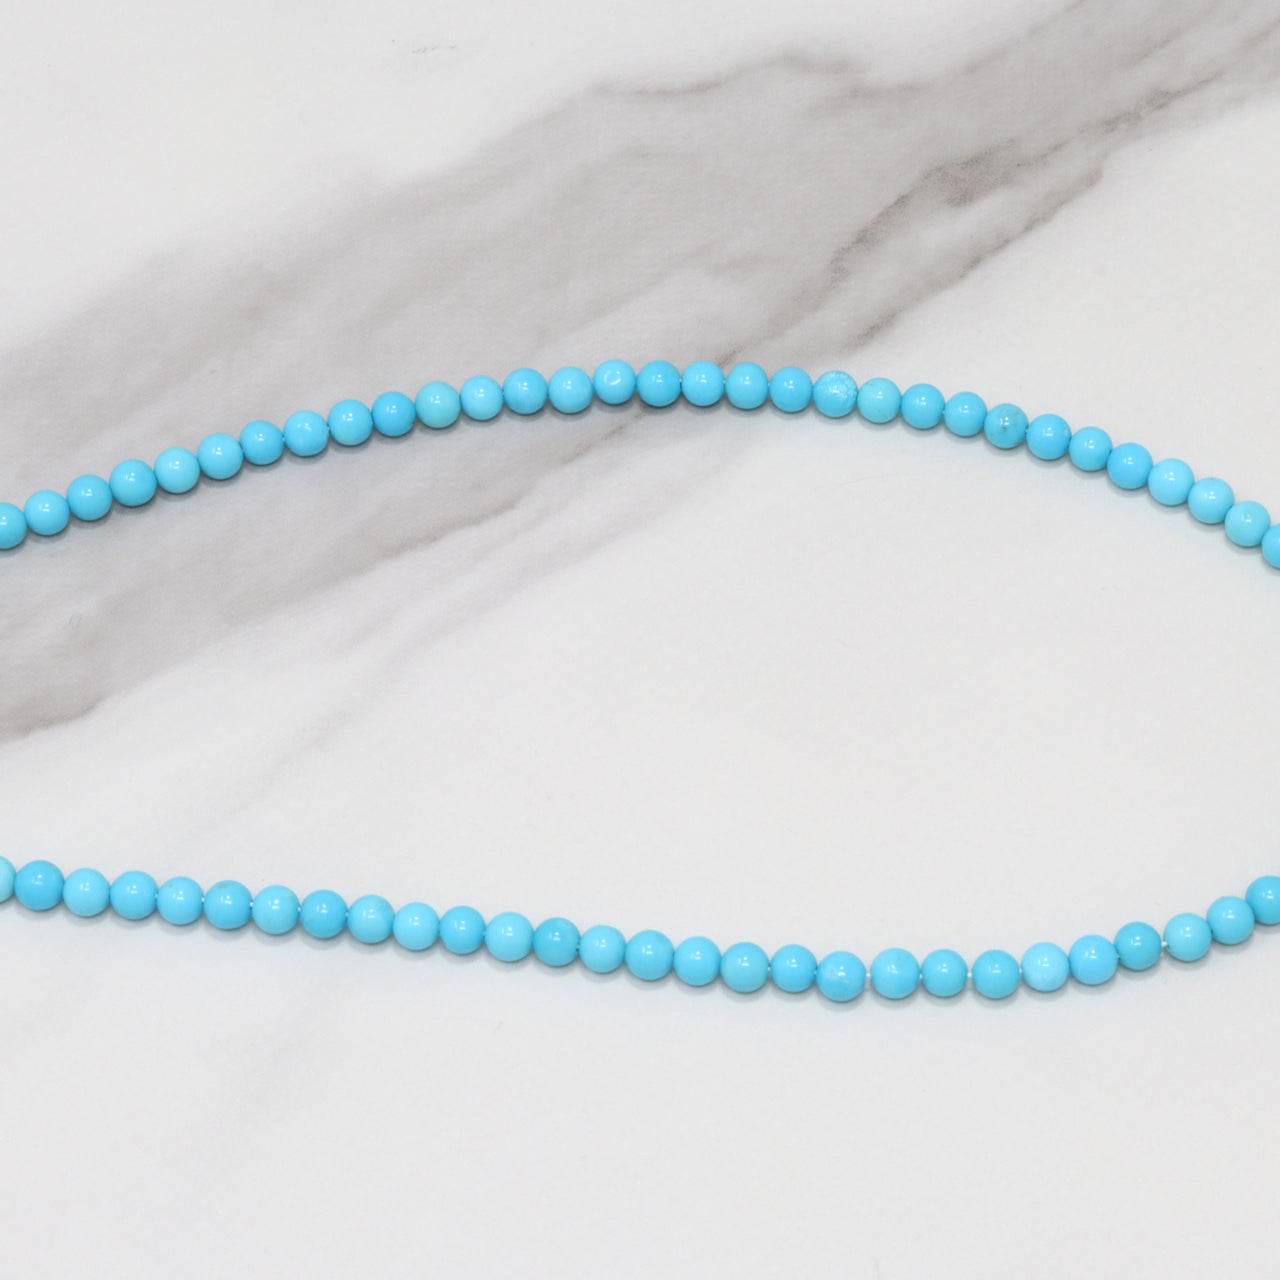 Sleeping Beauty Turquoise 3.5mm Smooth Rounds Bead Strand